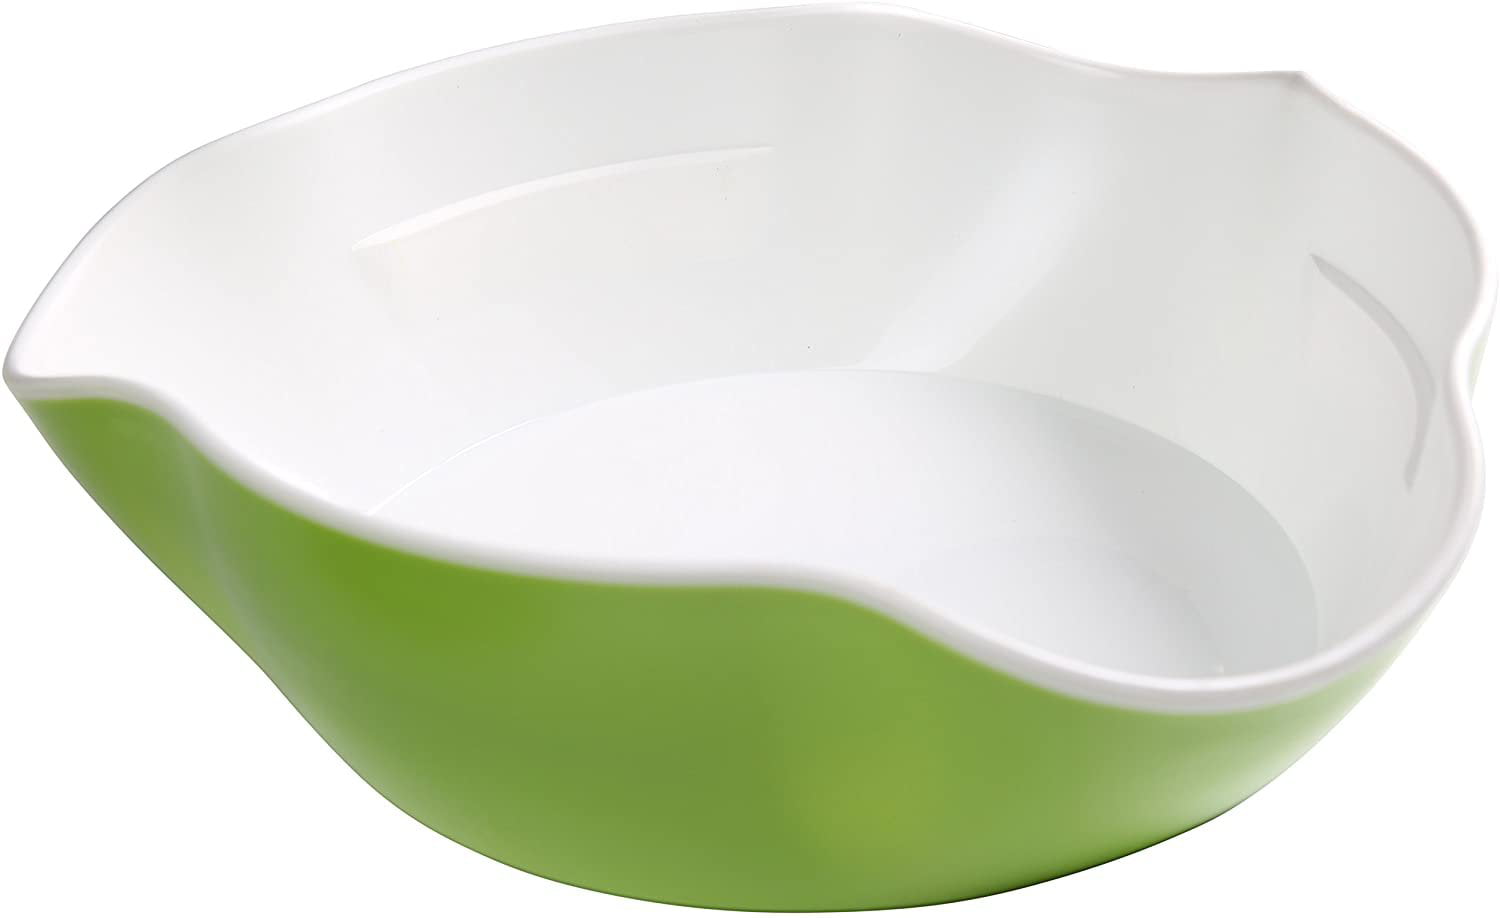 Medium, Green Kitchen Winners Multi Sectional Double snack dish with lid for nuts fruits candies and more.. 